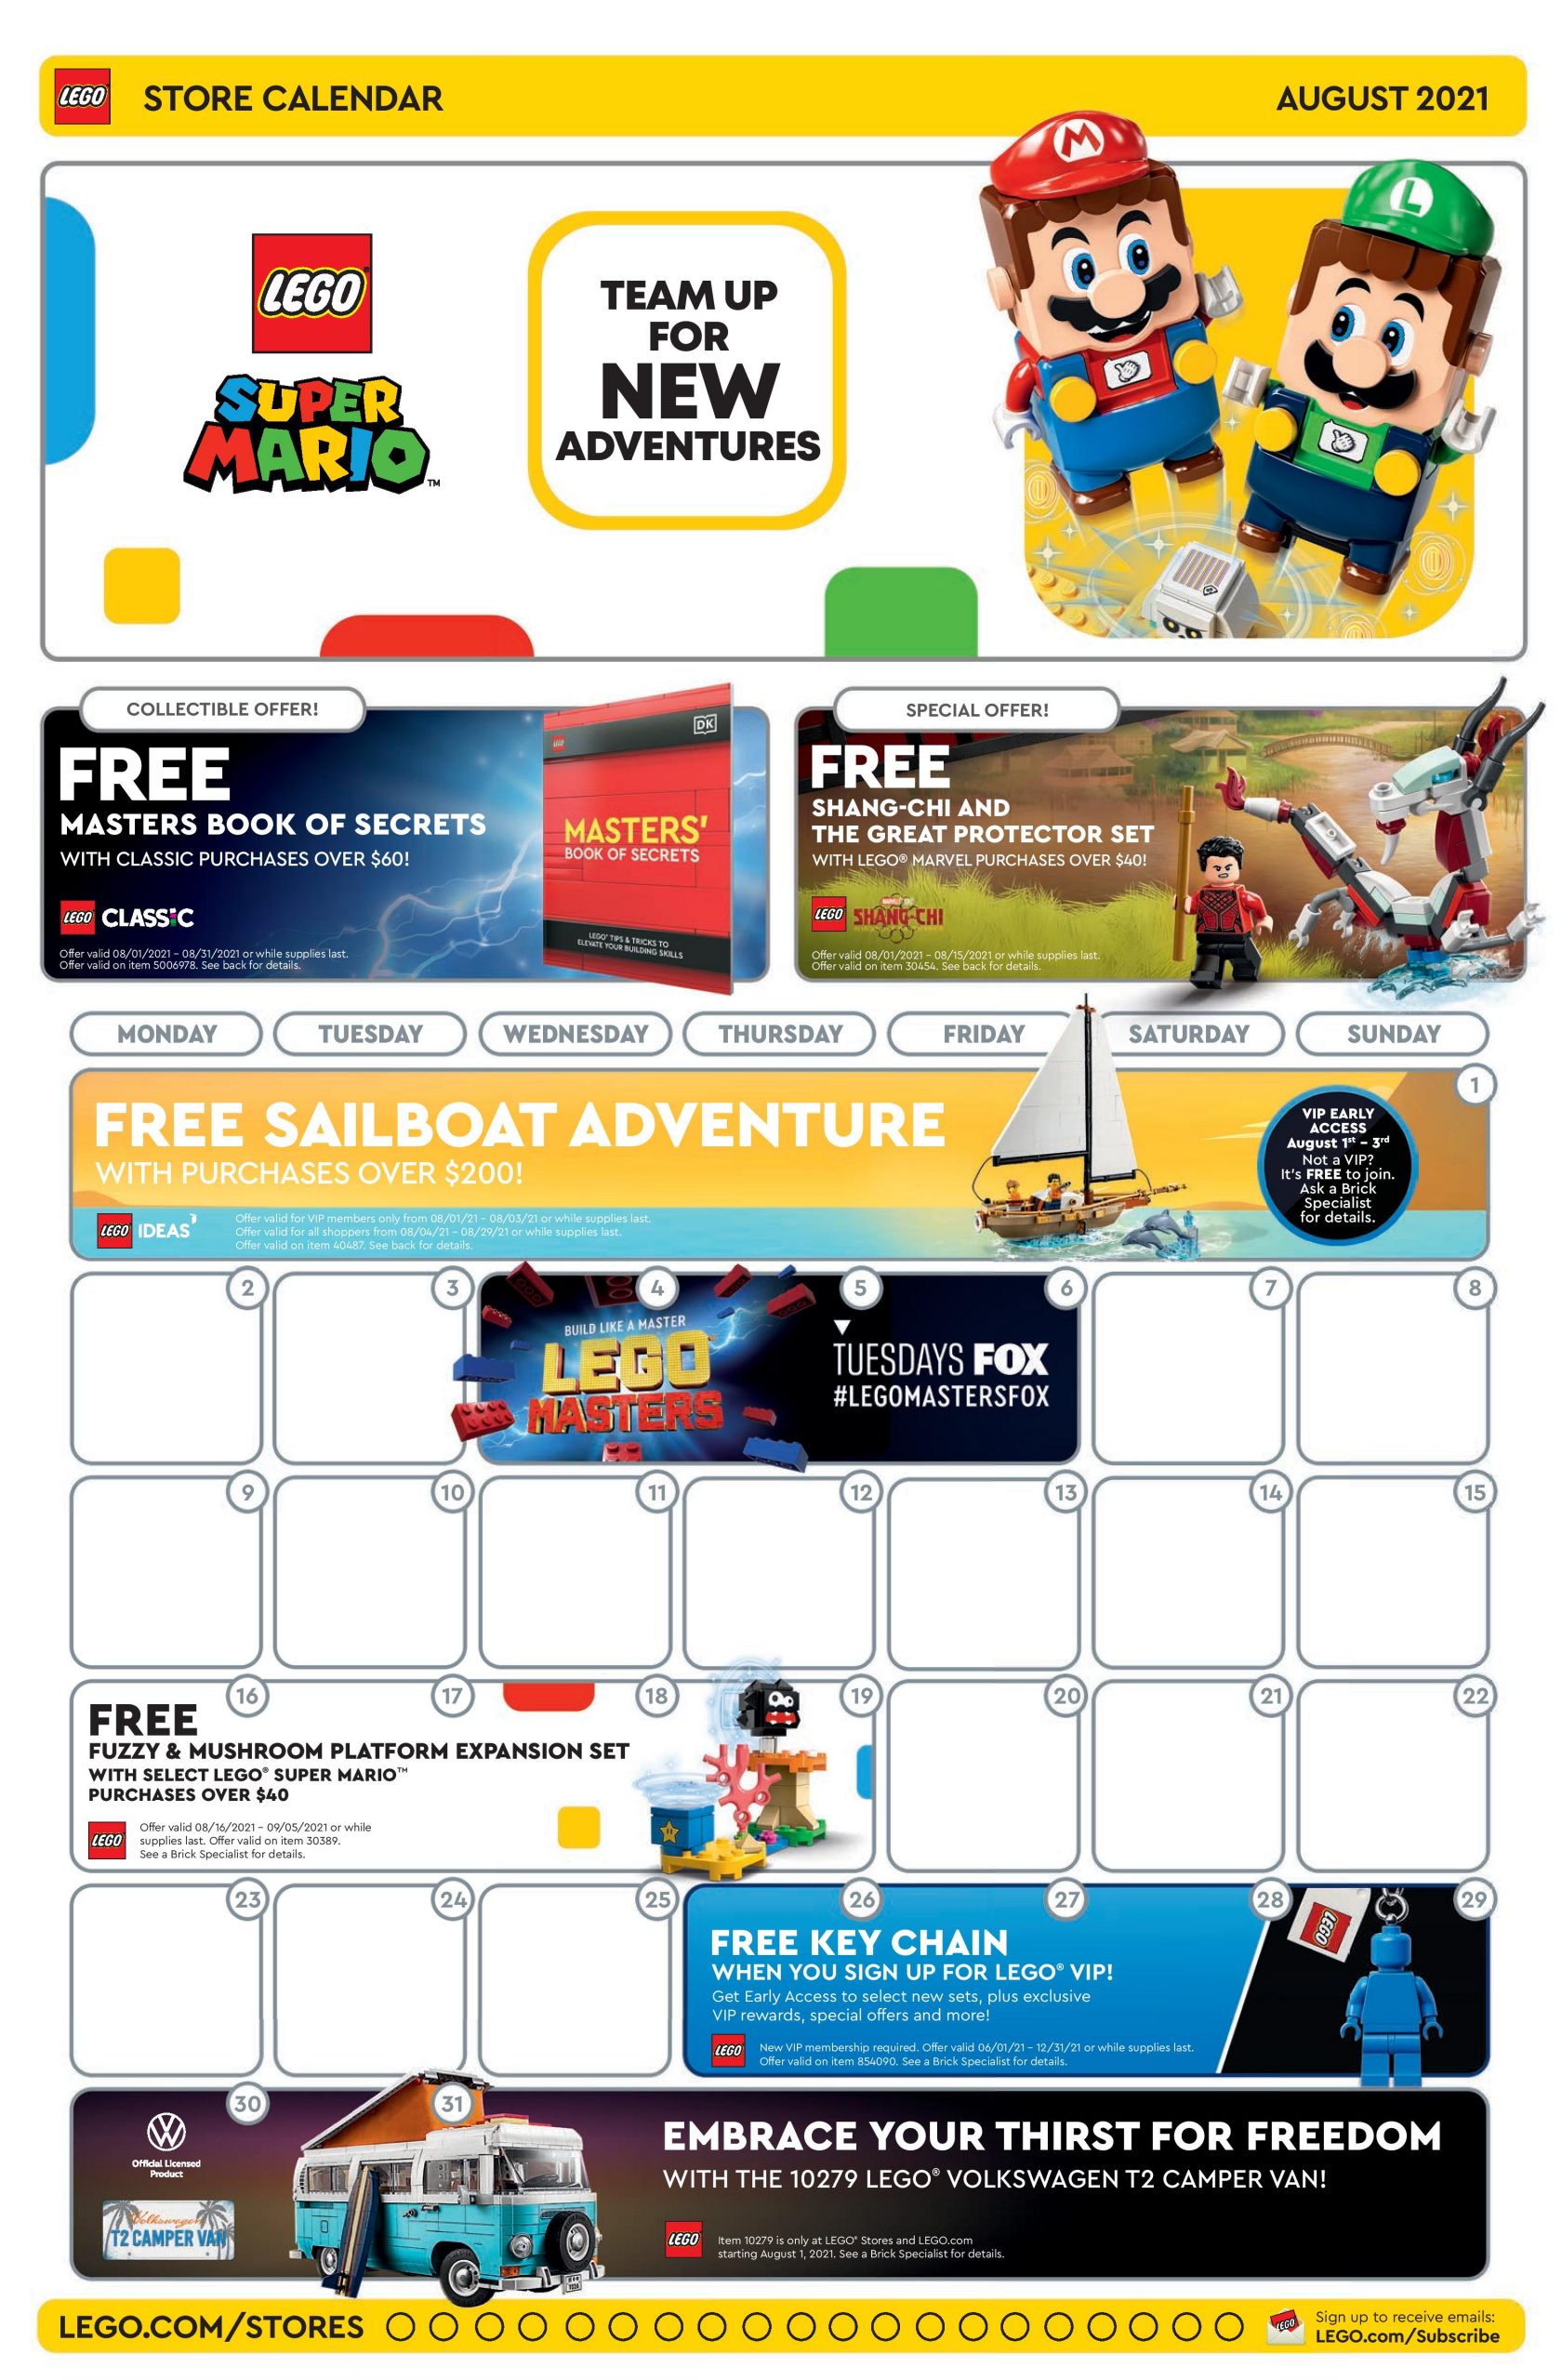 Lego Calendar August 2022 Lego August 2021 Store Calendar Promotions And Events - The Brick Fan